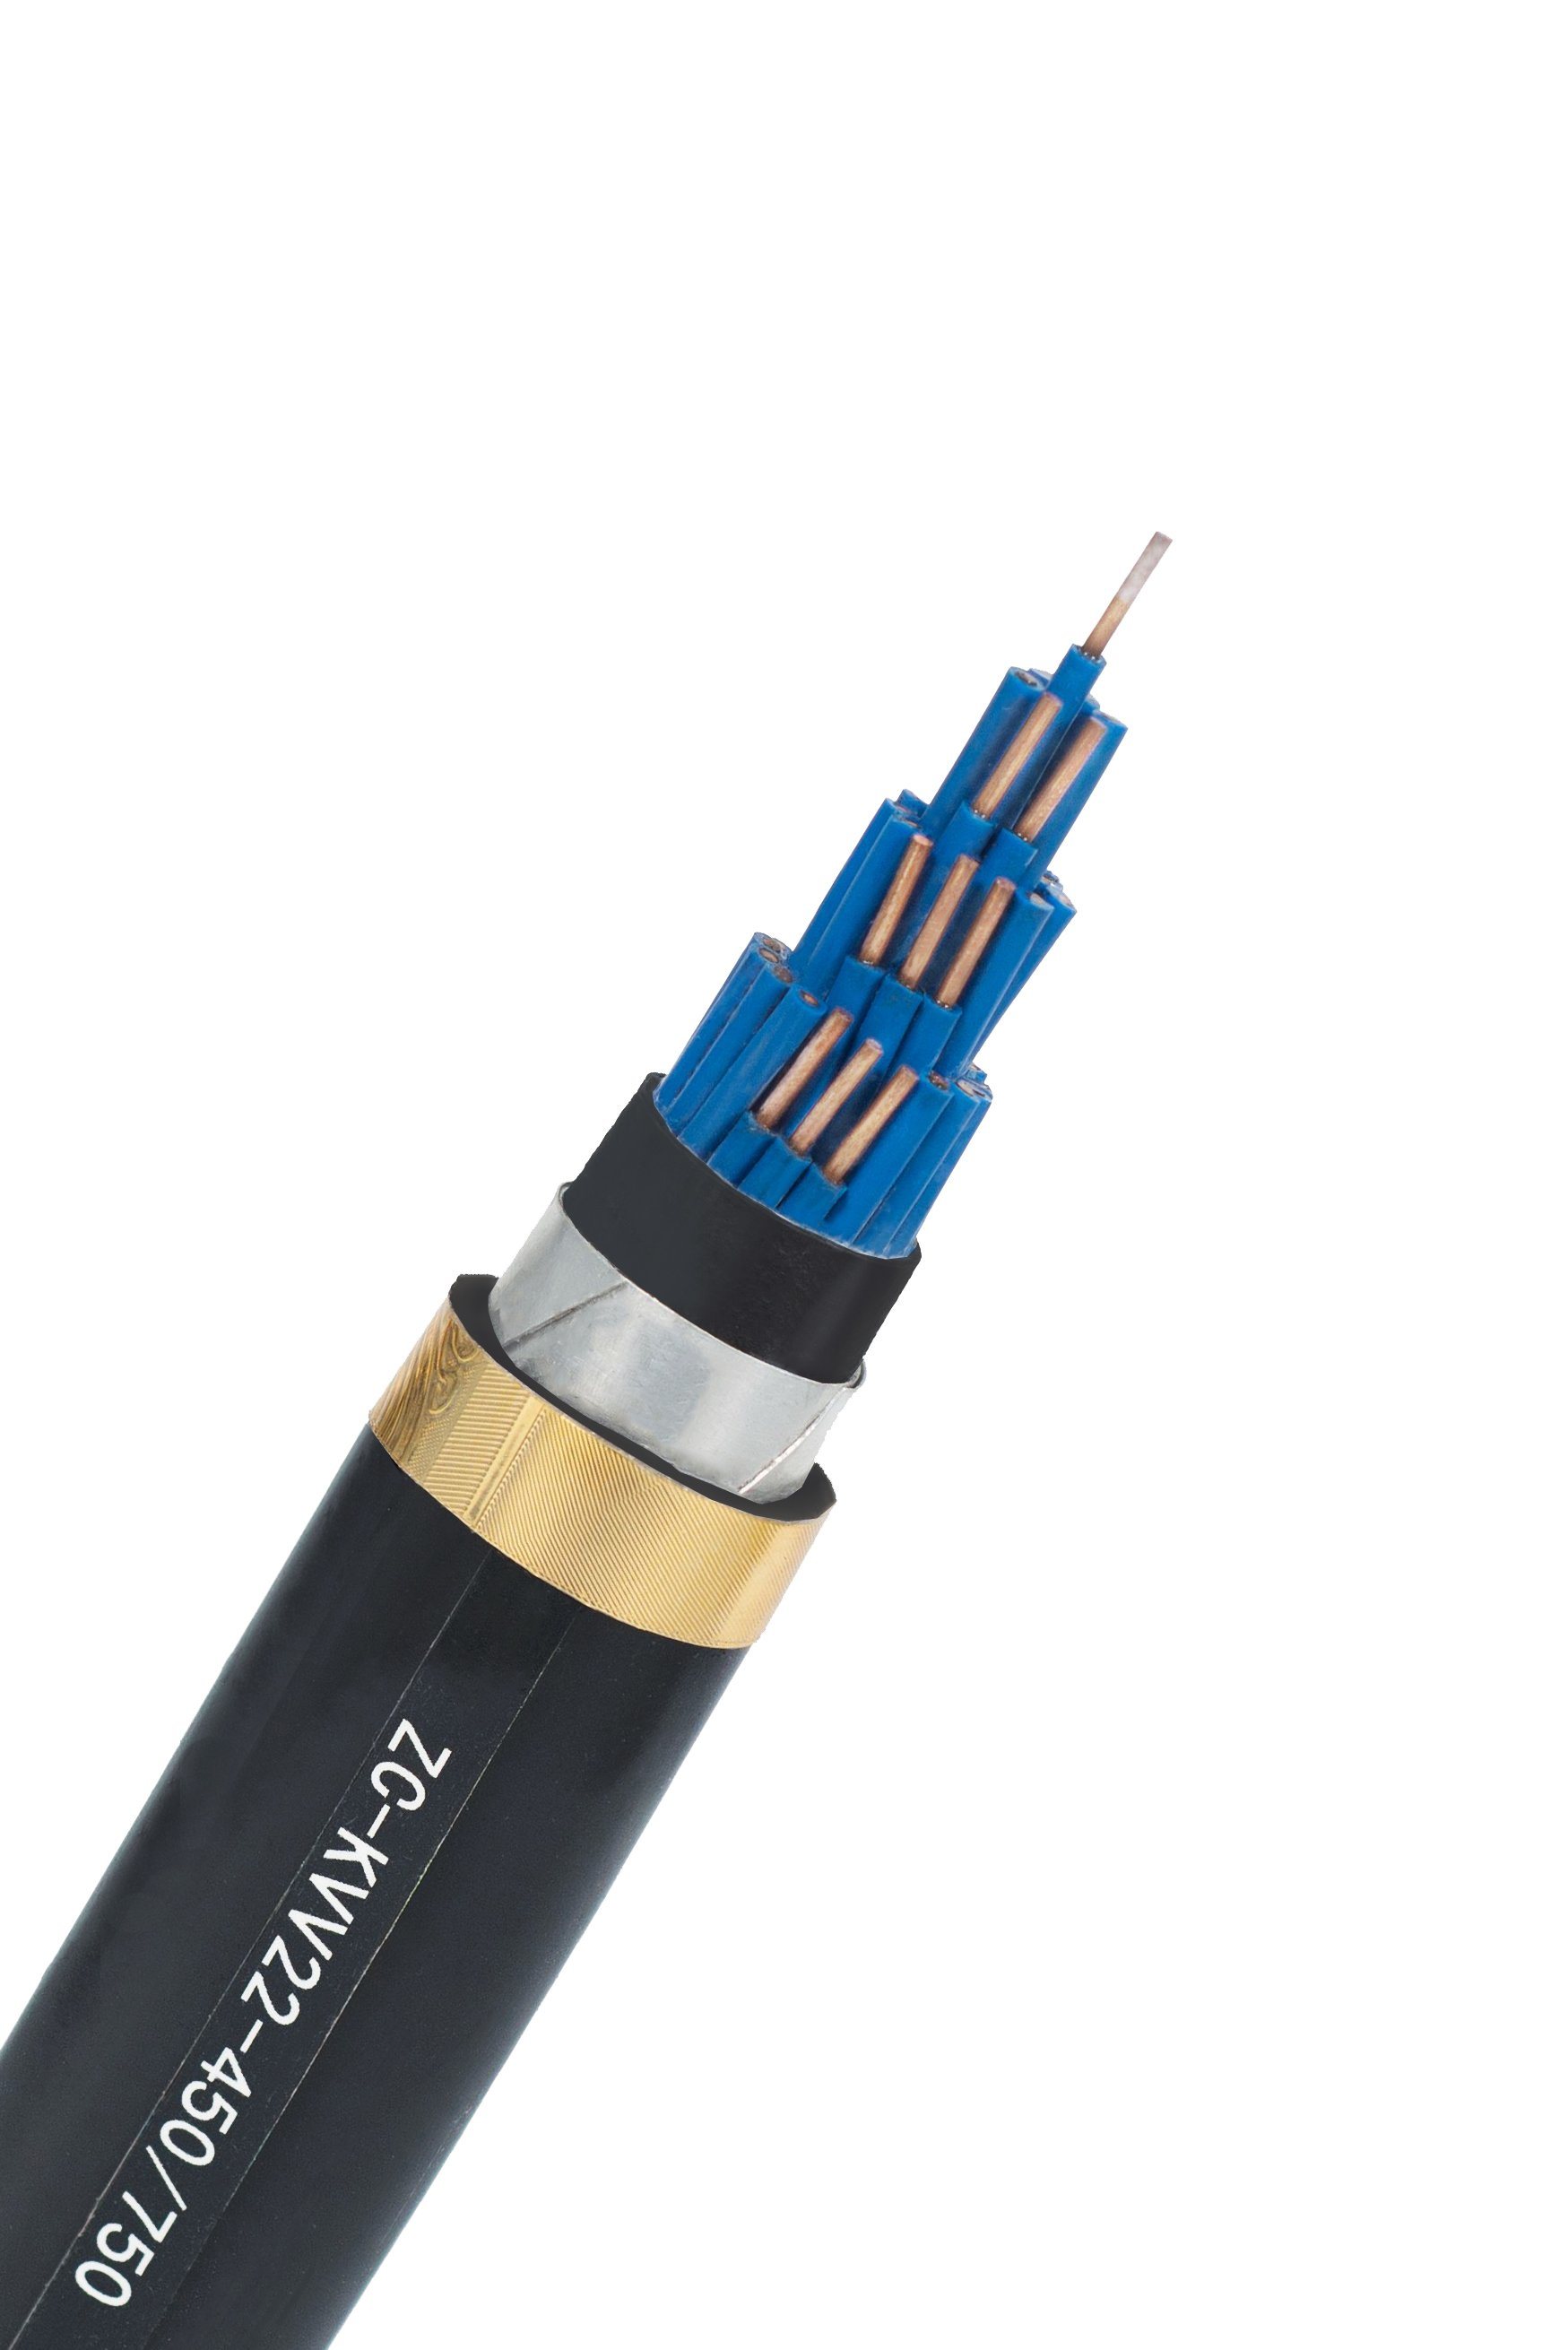 European Standard Flexible Data Cable Liyy 2 3 4 5 6 7 8 10 Core 0.3 0.75 1.5 Sq mm Electronic and Electrical Communication Signal Control Cable